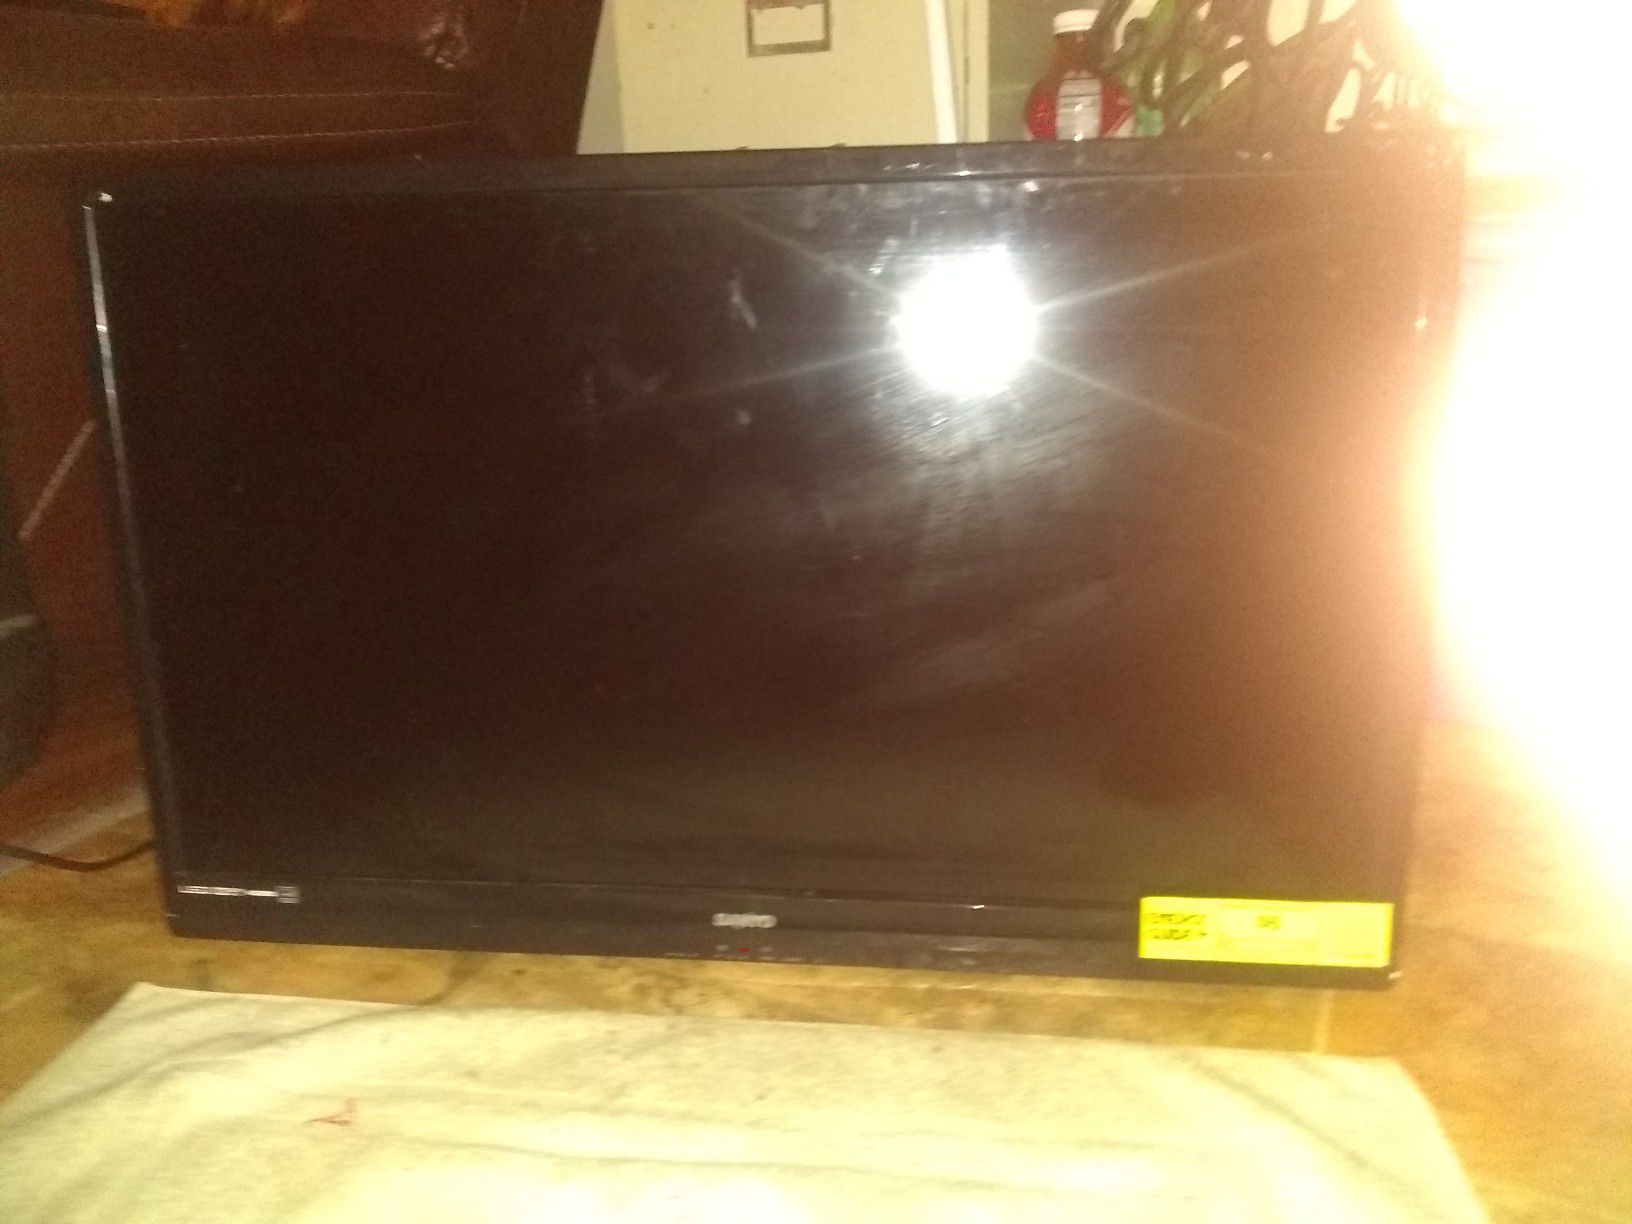 19" flatscreen sanyo. Only used once